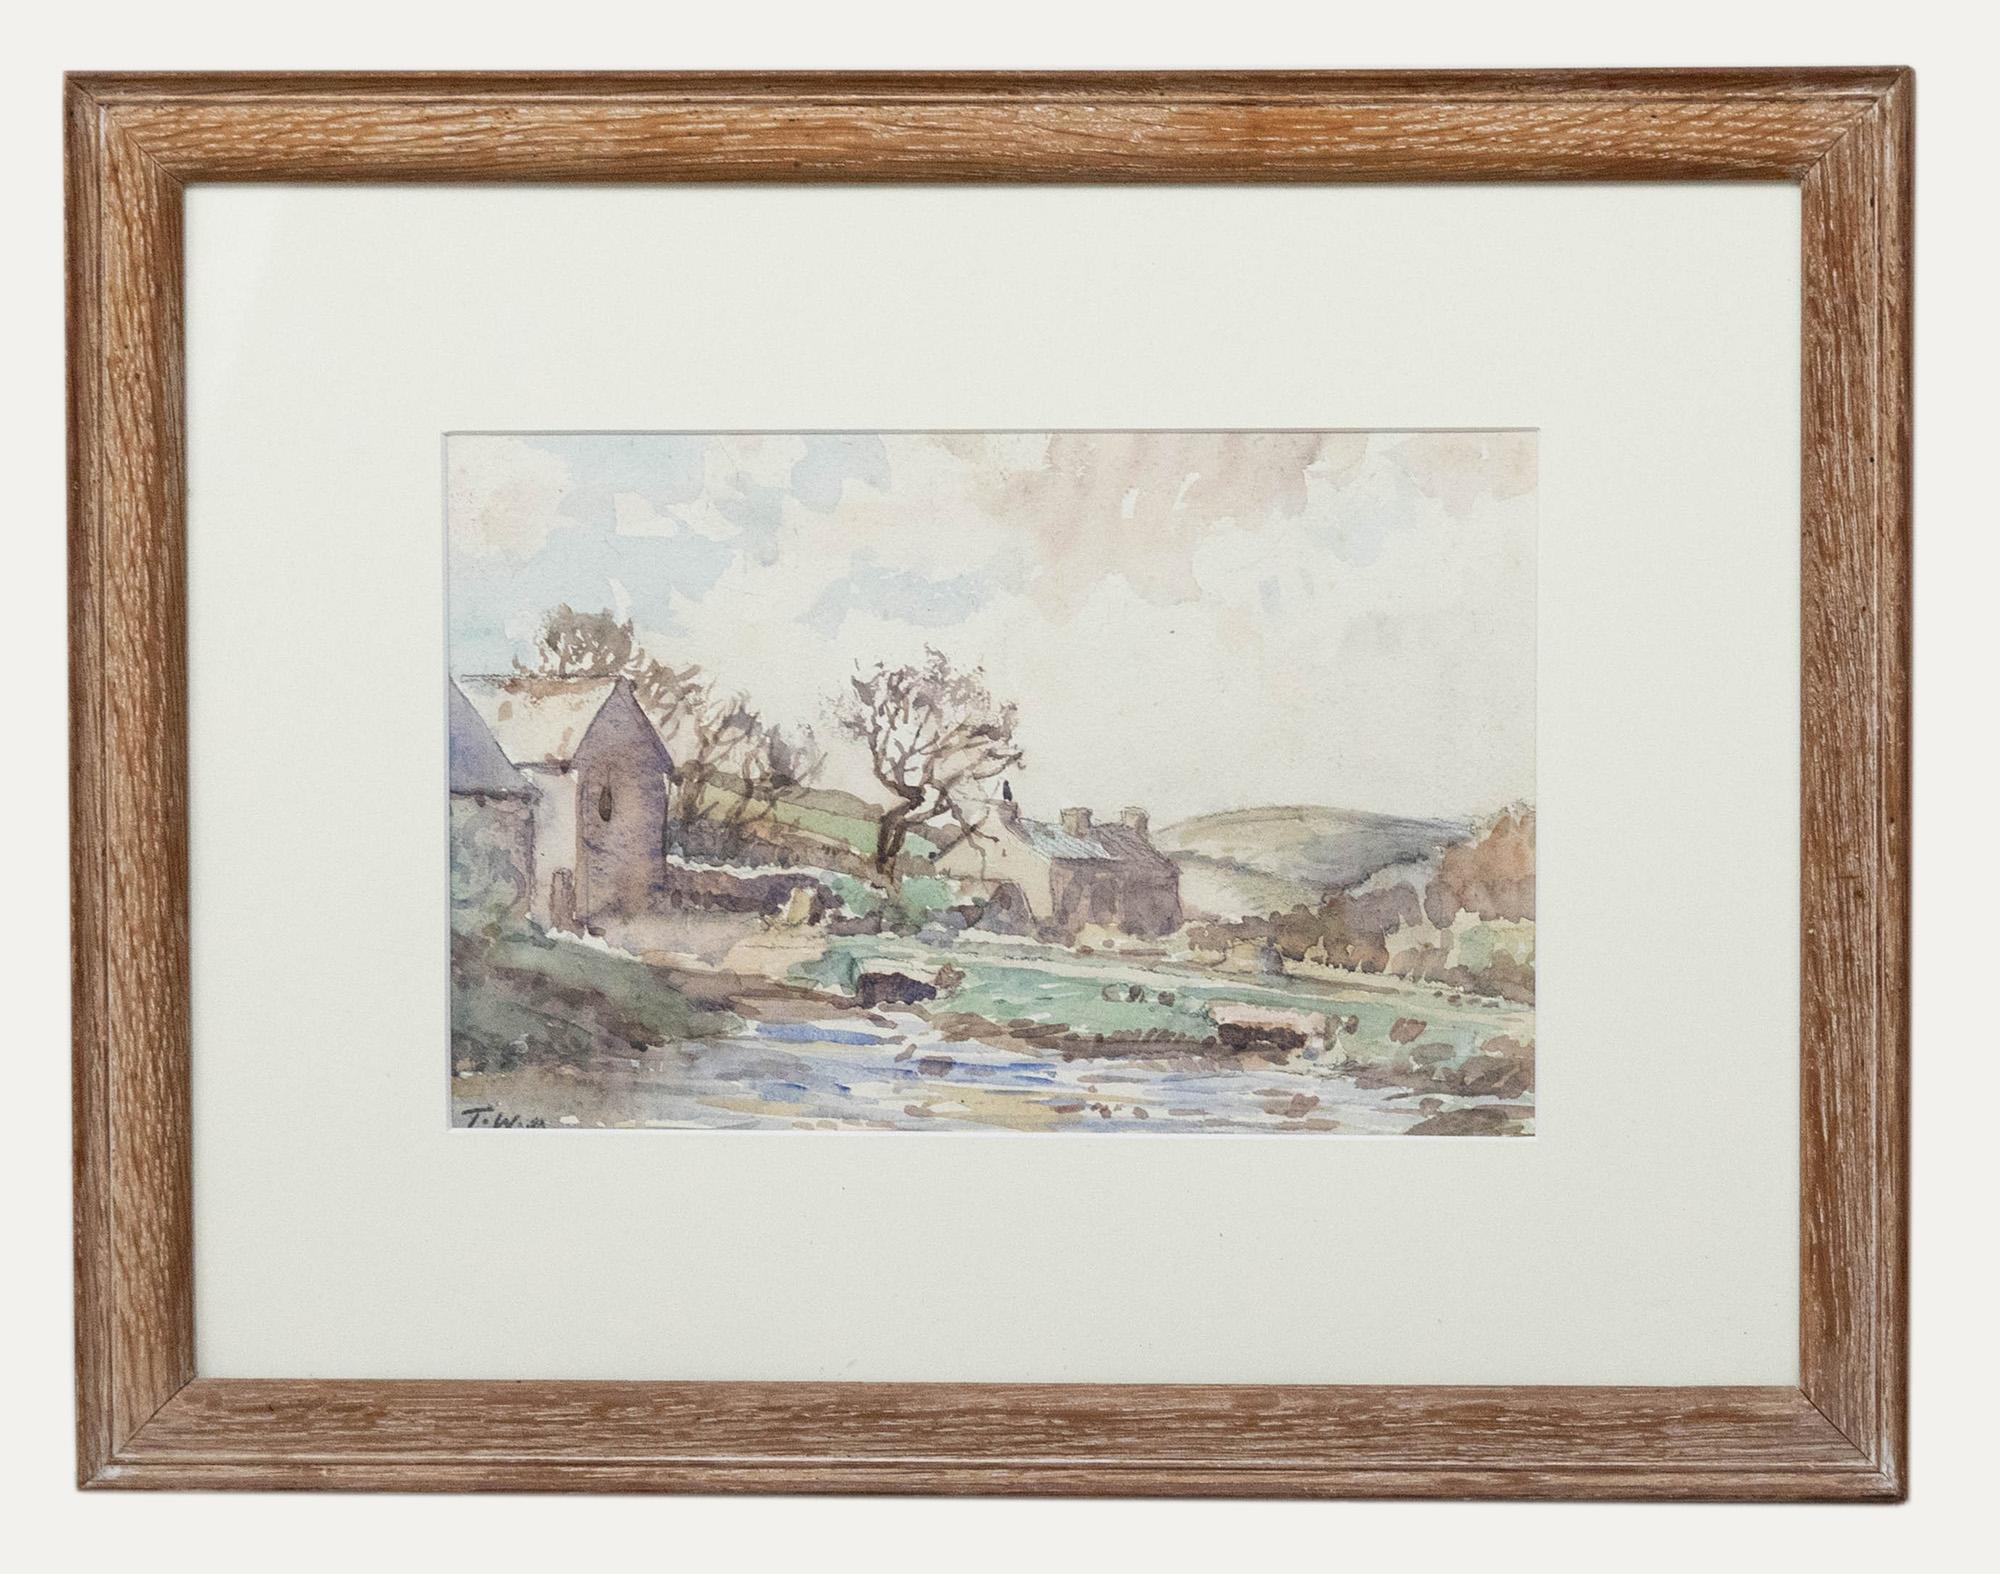 Unknown Landscape Art - Thomas W. Armes (1894-1963) - Framed Early 20th Century Watercolour, Ford Farm